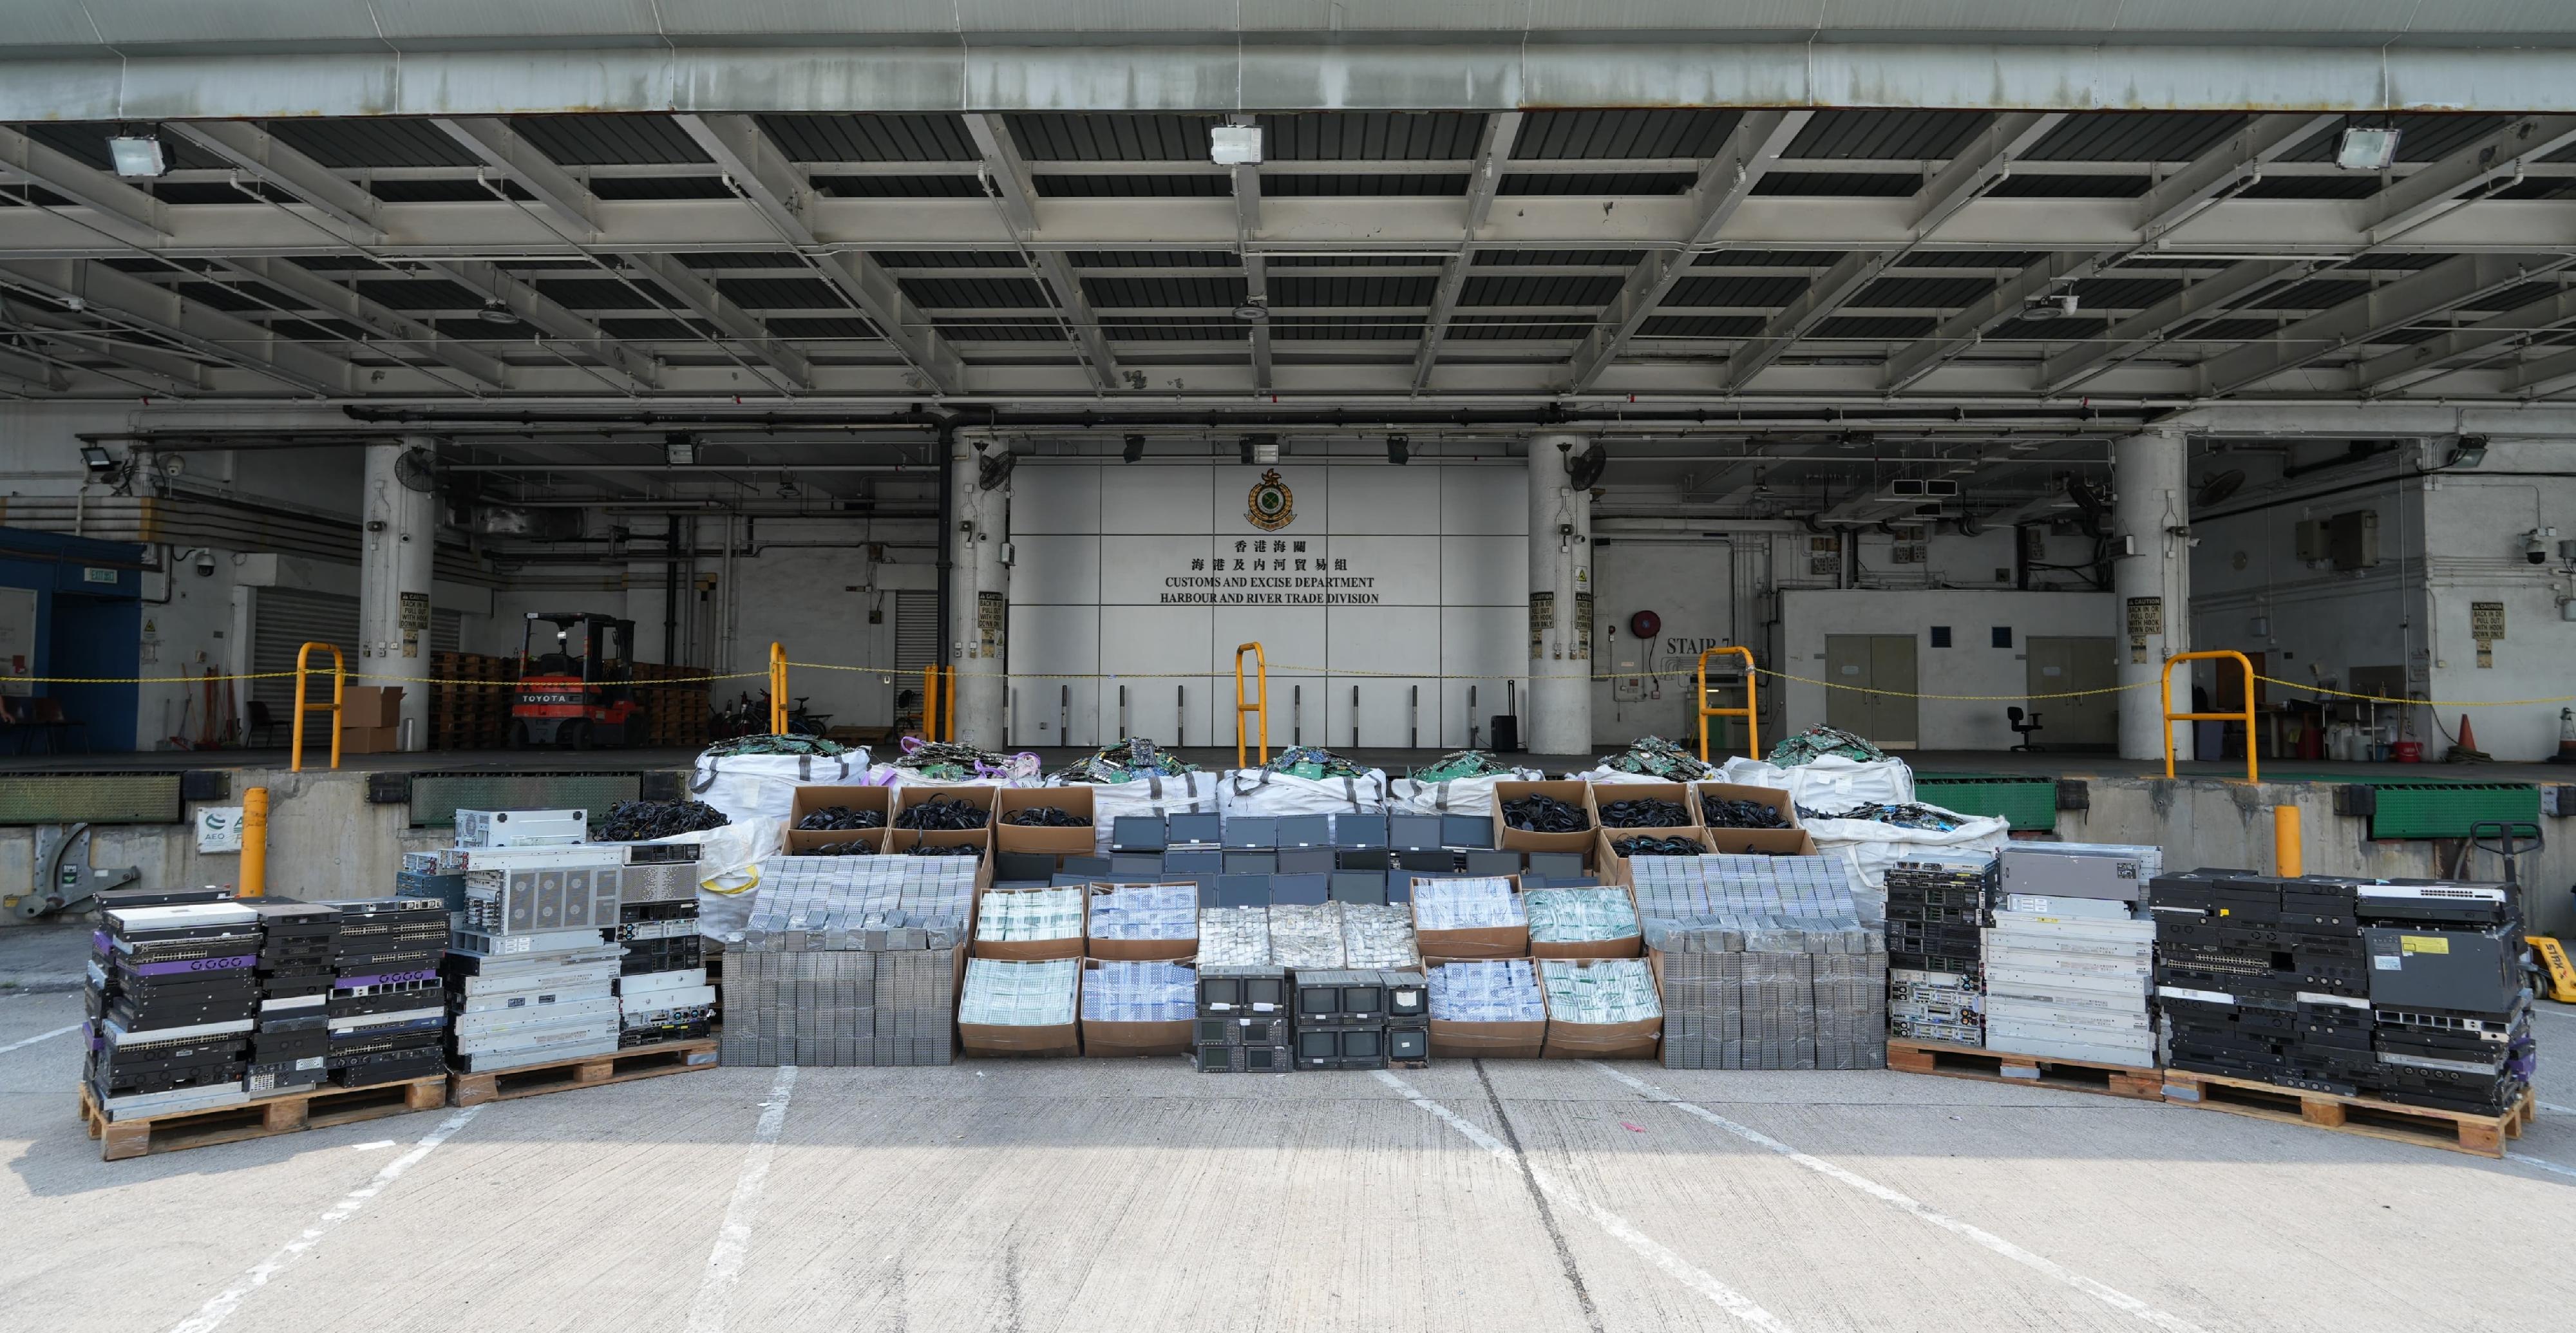 Hong Kong Customs on April 4 detected a suspected case of using an ocean-going vessel to smuggle goods to Malaysia at the Kwai Chung Container Terminals. A large batch of suspected smuggled goods, including integrated circuits, computer servers, routers, together with a batch of electronic waste, with a total estimated market value of about $100 million, was seized. Photo shows the suspected smuggled goods seized.